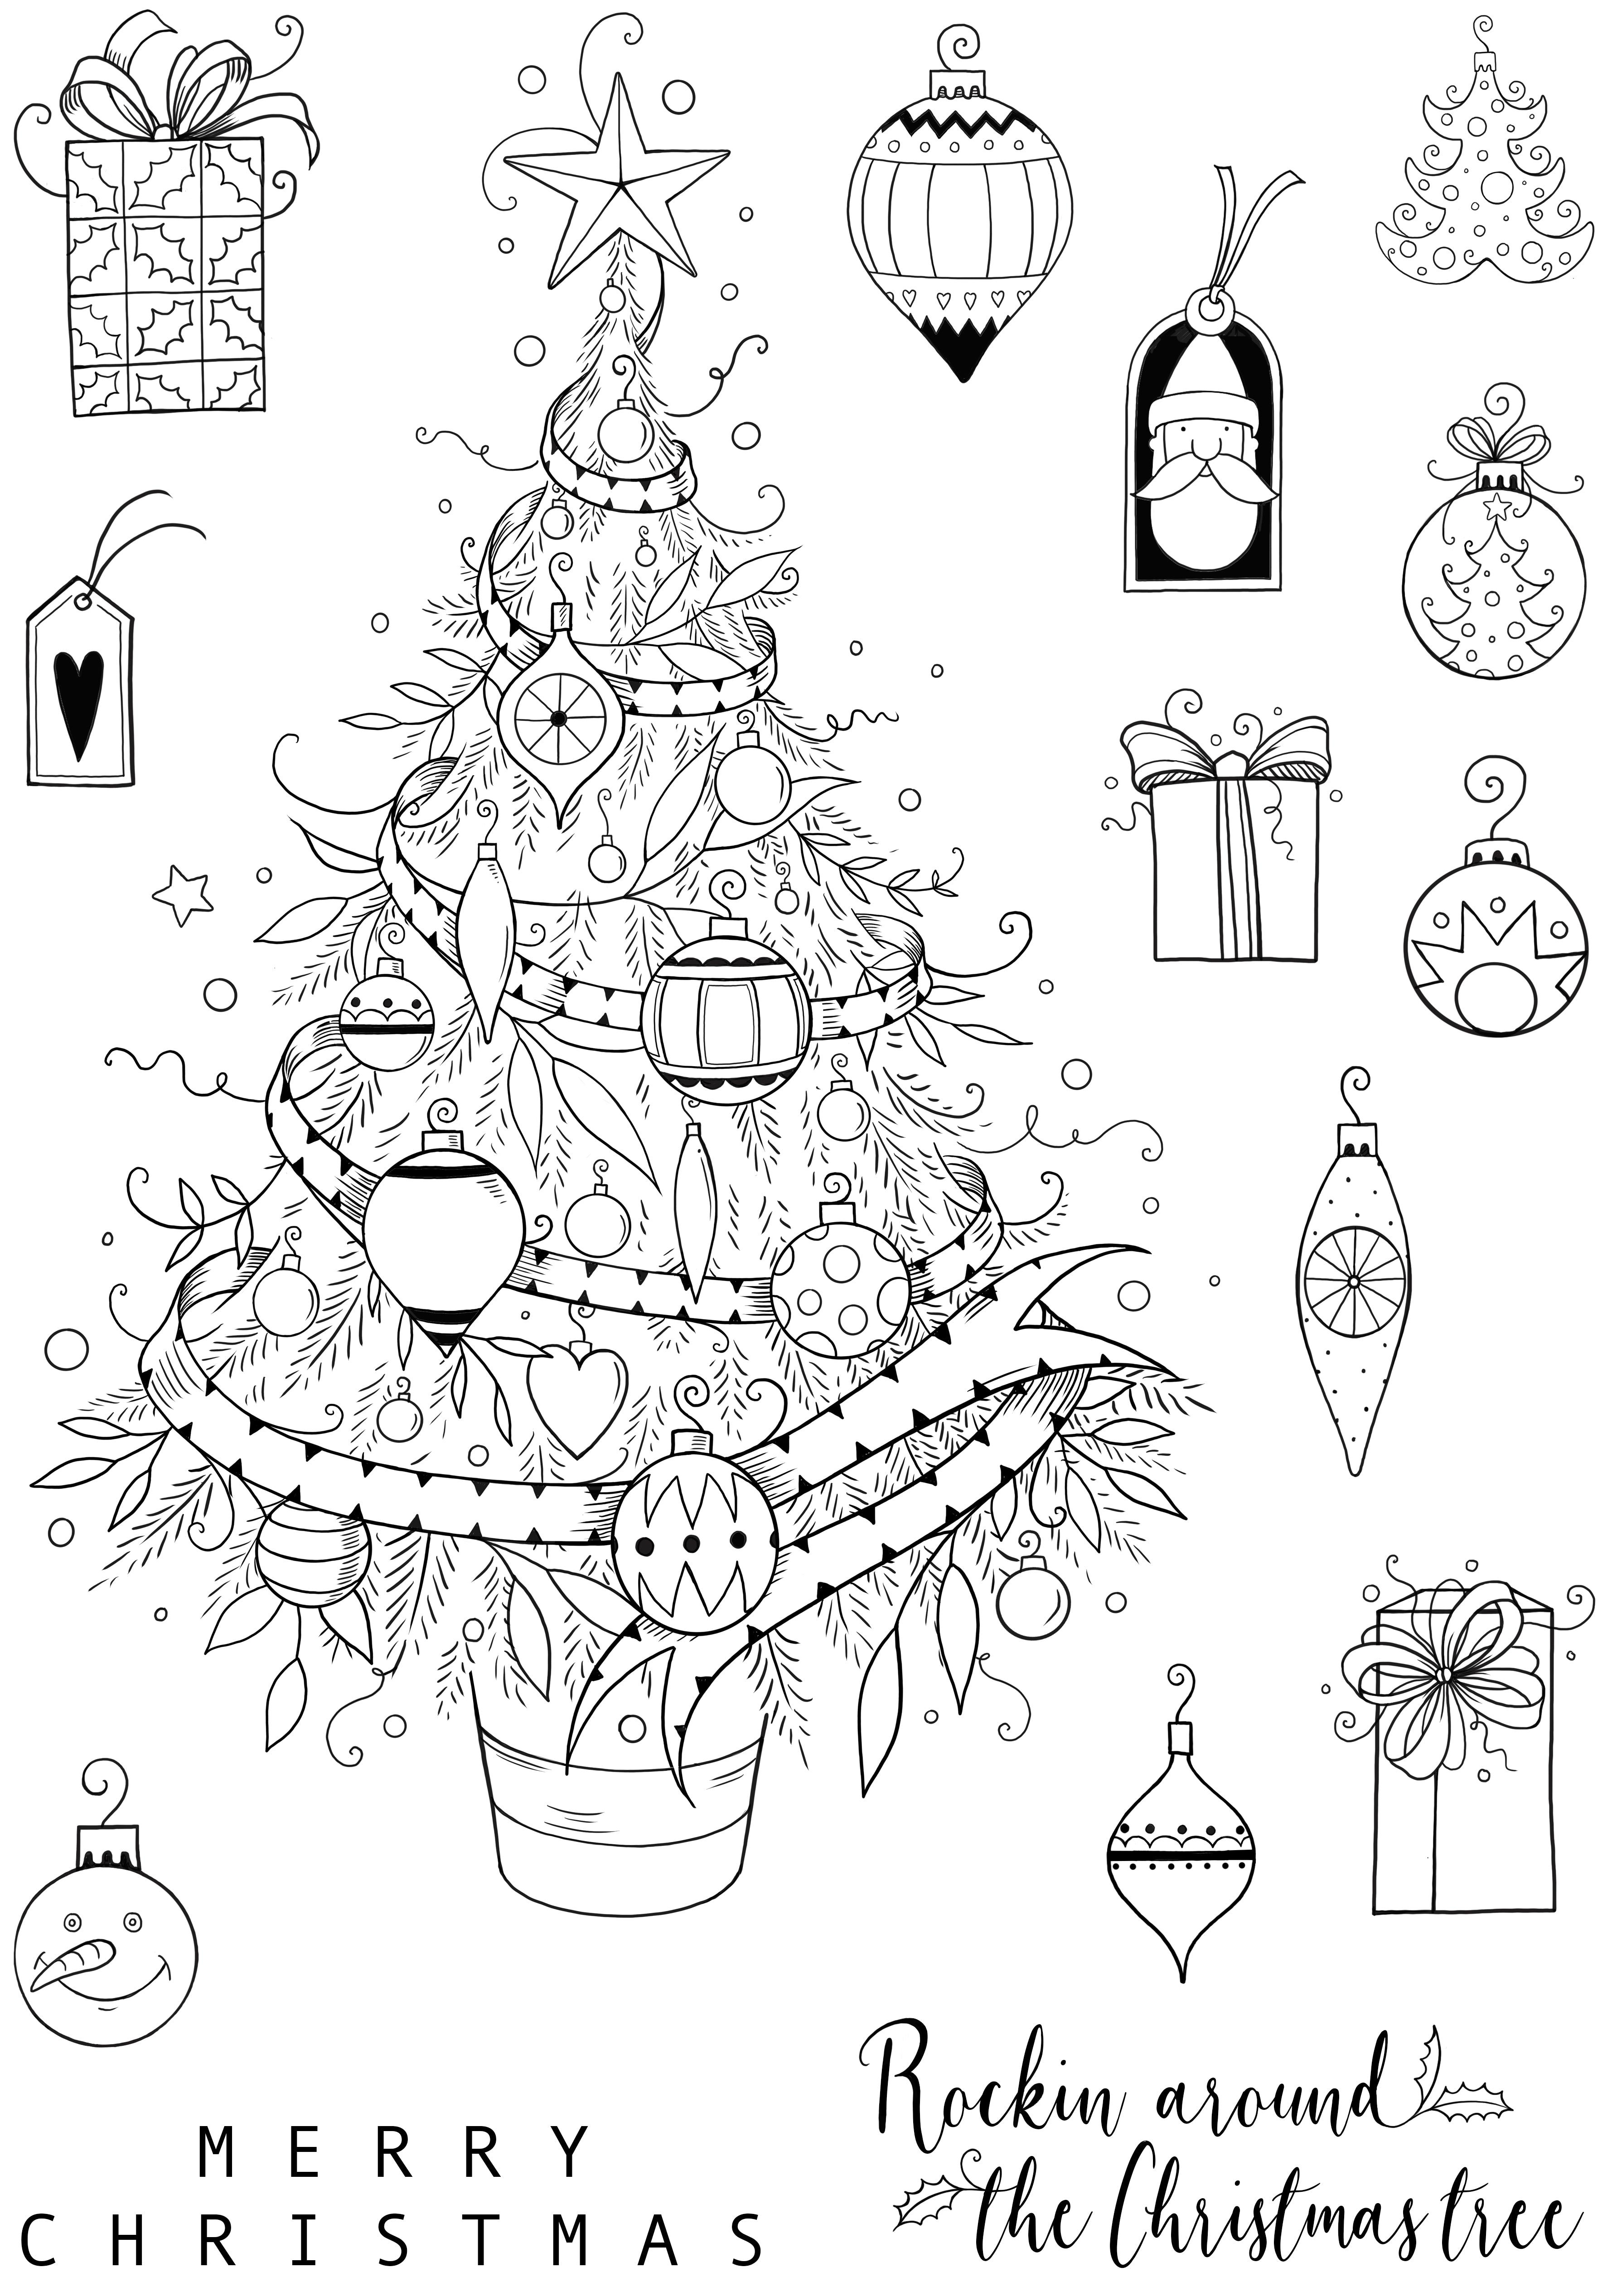 Pink Ink Designs Oh Christmas Tree 6 in x 8 in Clear Stamp Set